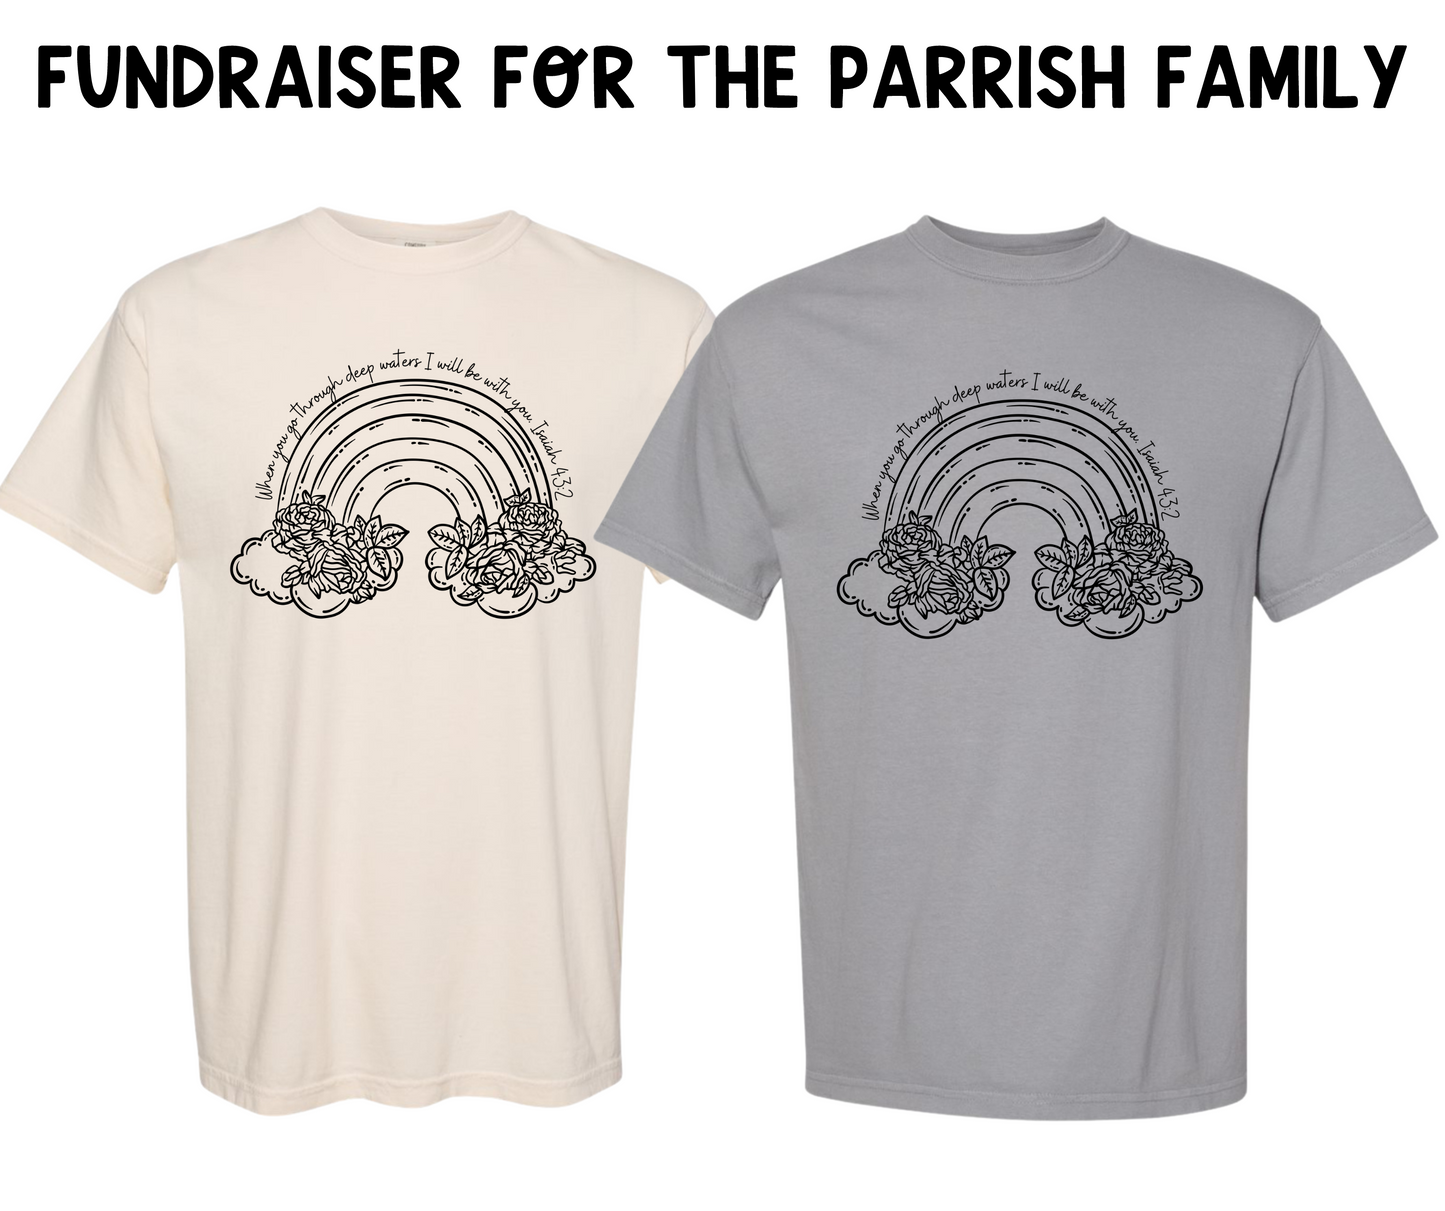 Parrish Family Fundraiser Tee - SHIPS BY 2/10